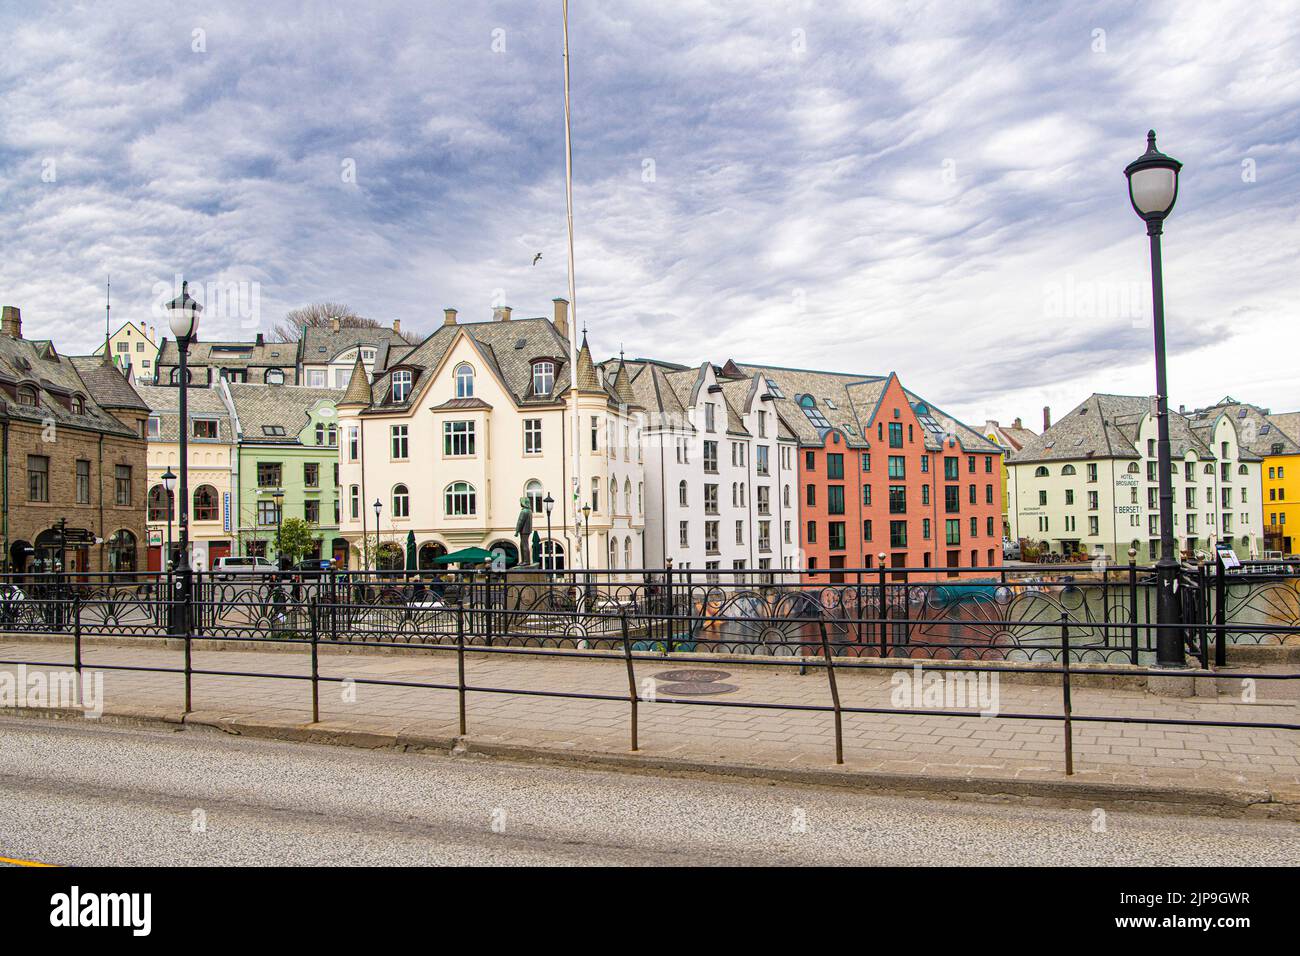 Ålesund is a port town on the west coast of Norway, at the entrance to the Geiranger fjord. It’s known for the art nouveau architectural style in whic Stock Photo